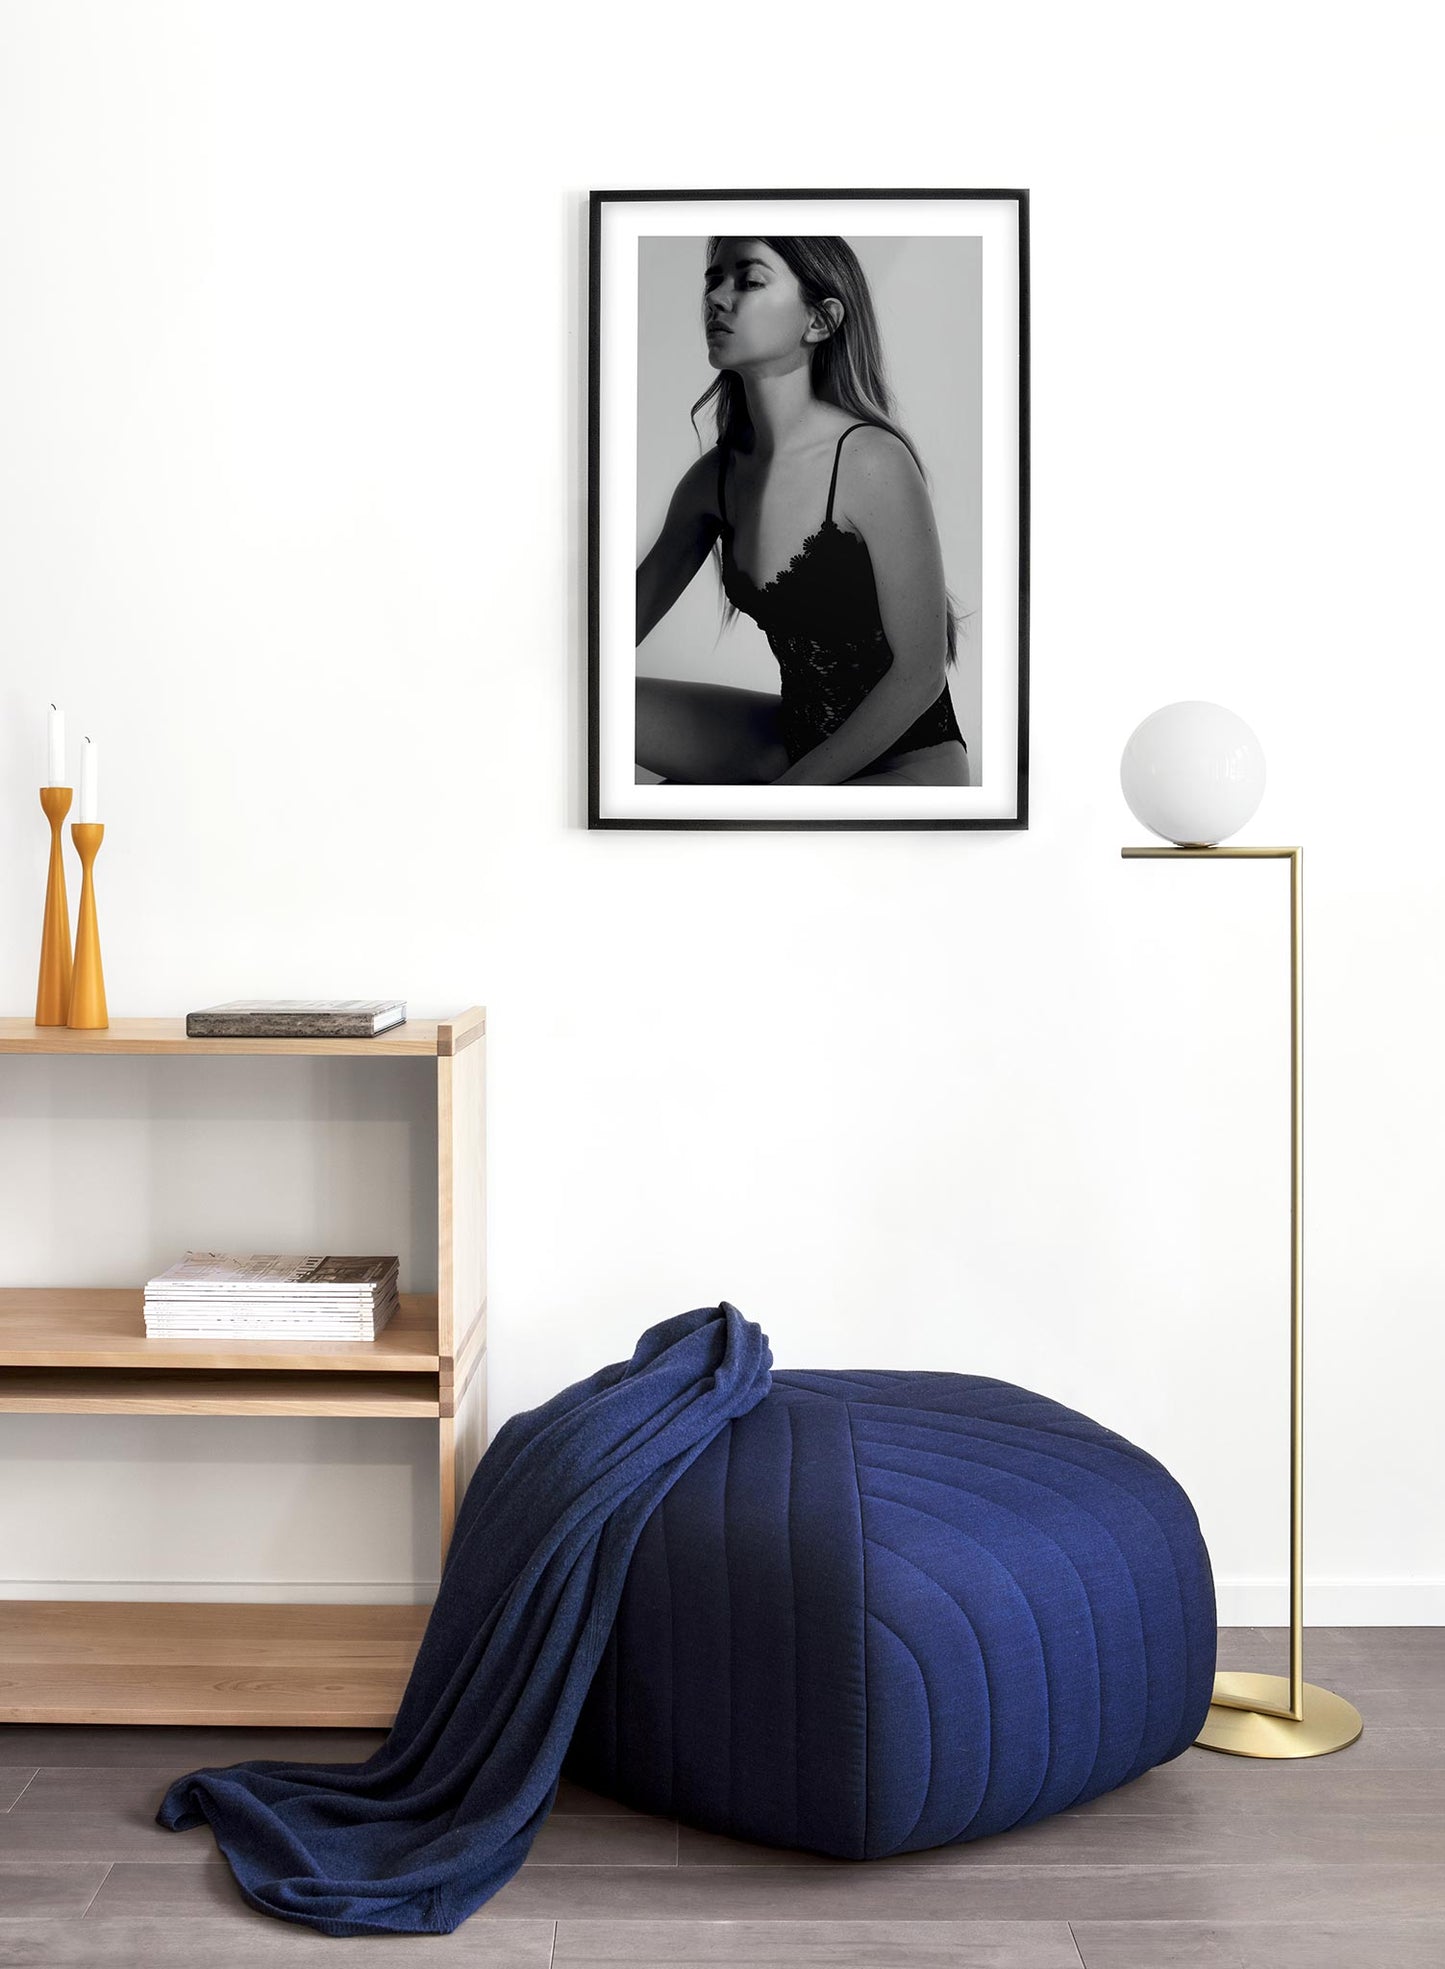 Black and white fashion photography poster by Opposite Wall with woman in lingerie - Lifestyle - Living Room